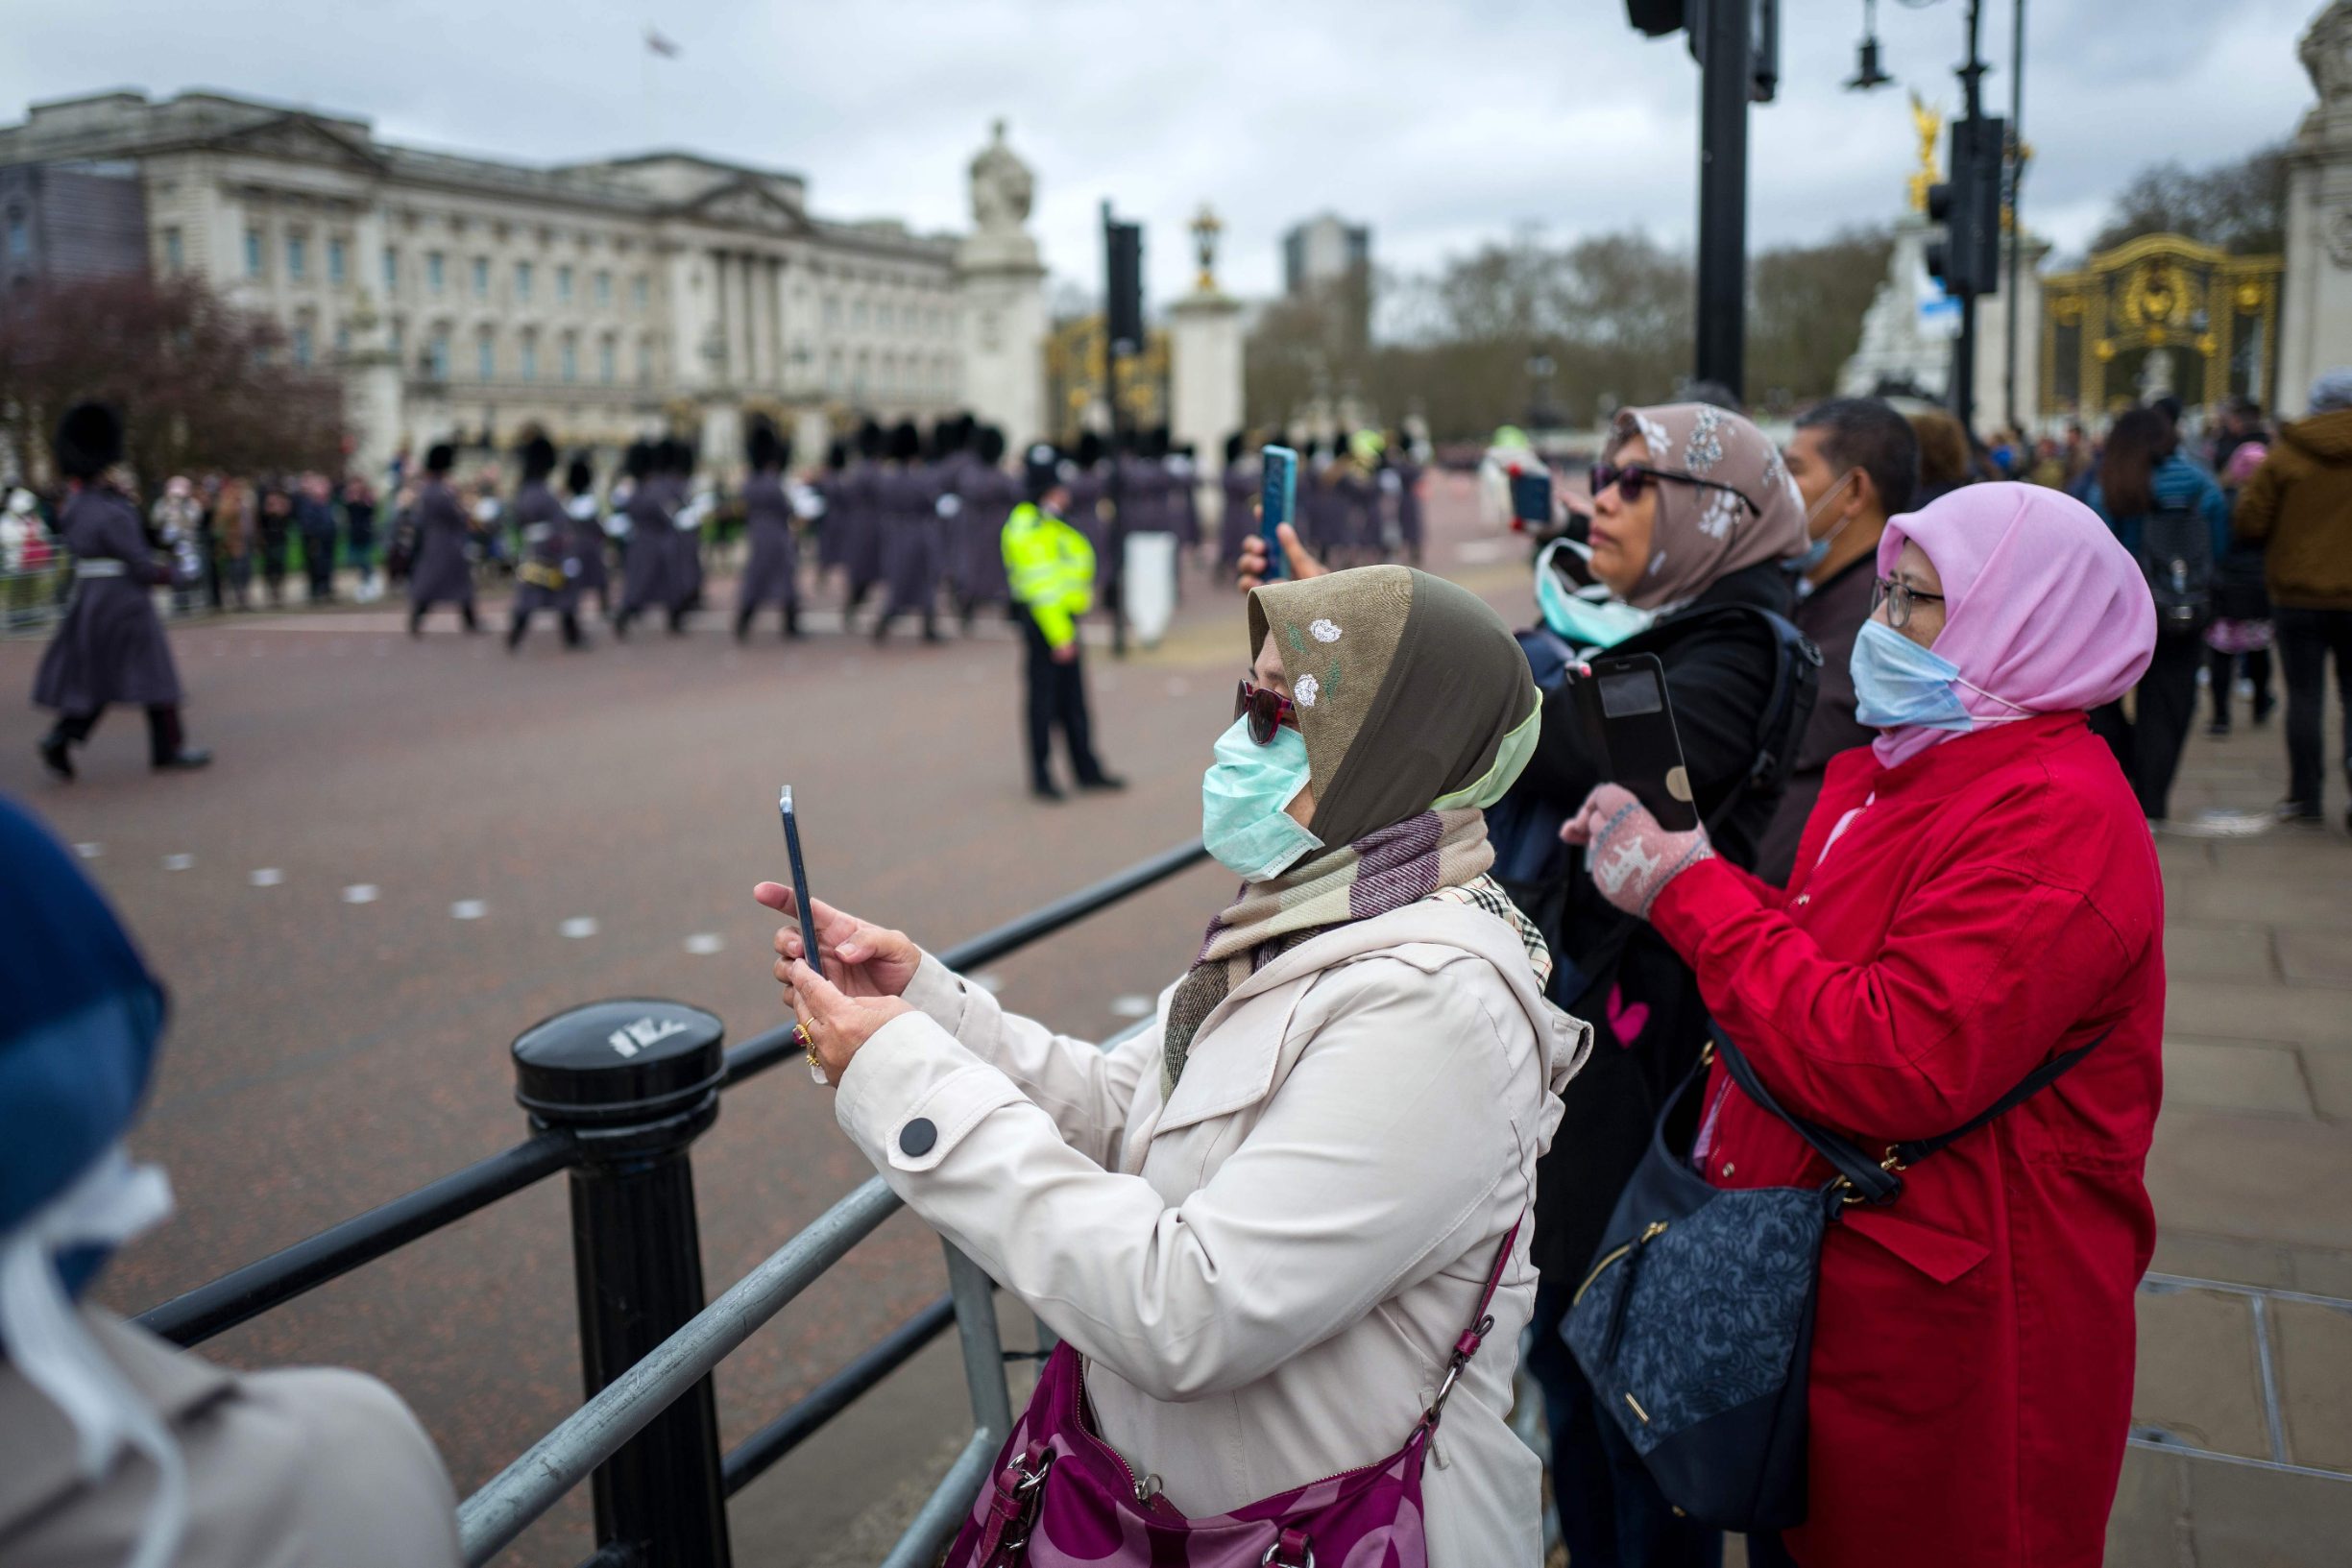 Tourists wearing protective face masks watch a changing of the Guards outside Buckingham Palace in London on March 15, 2020. (Photo by Tolga AKMEN / AFP)